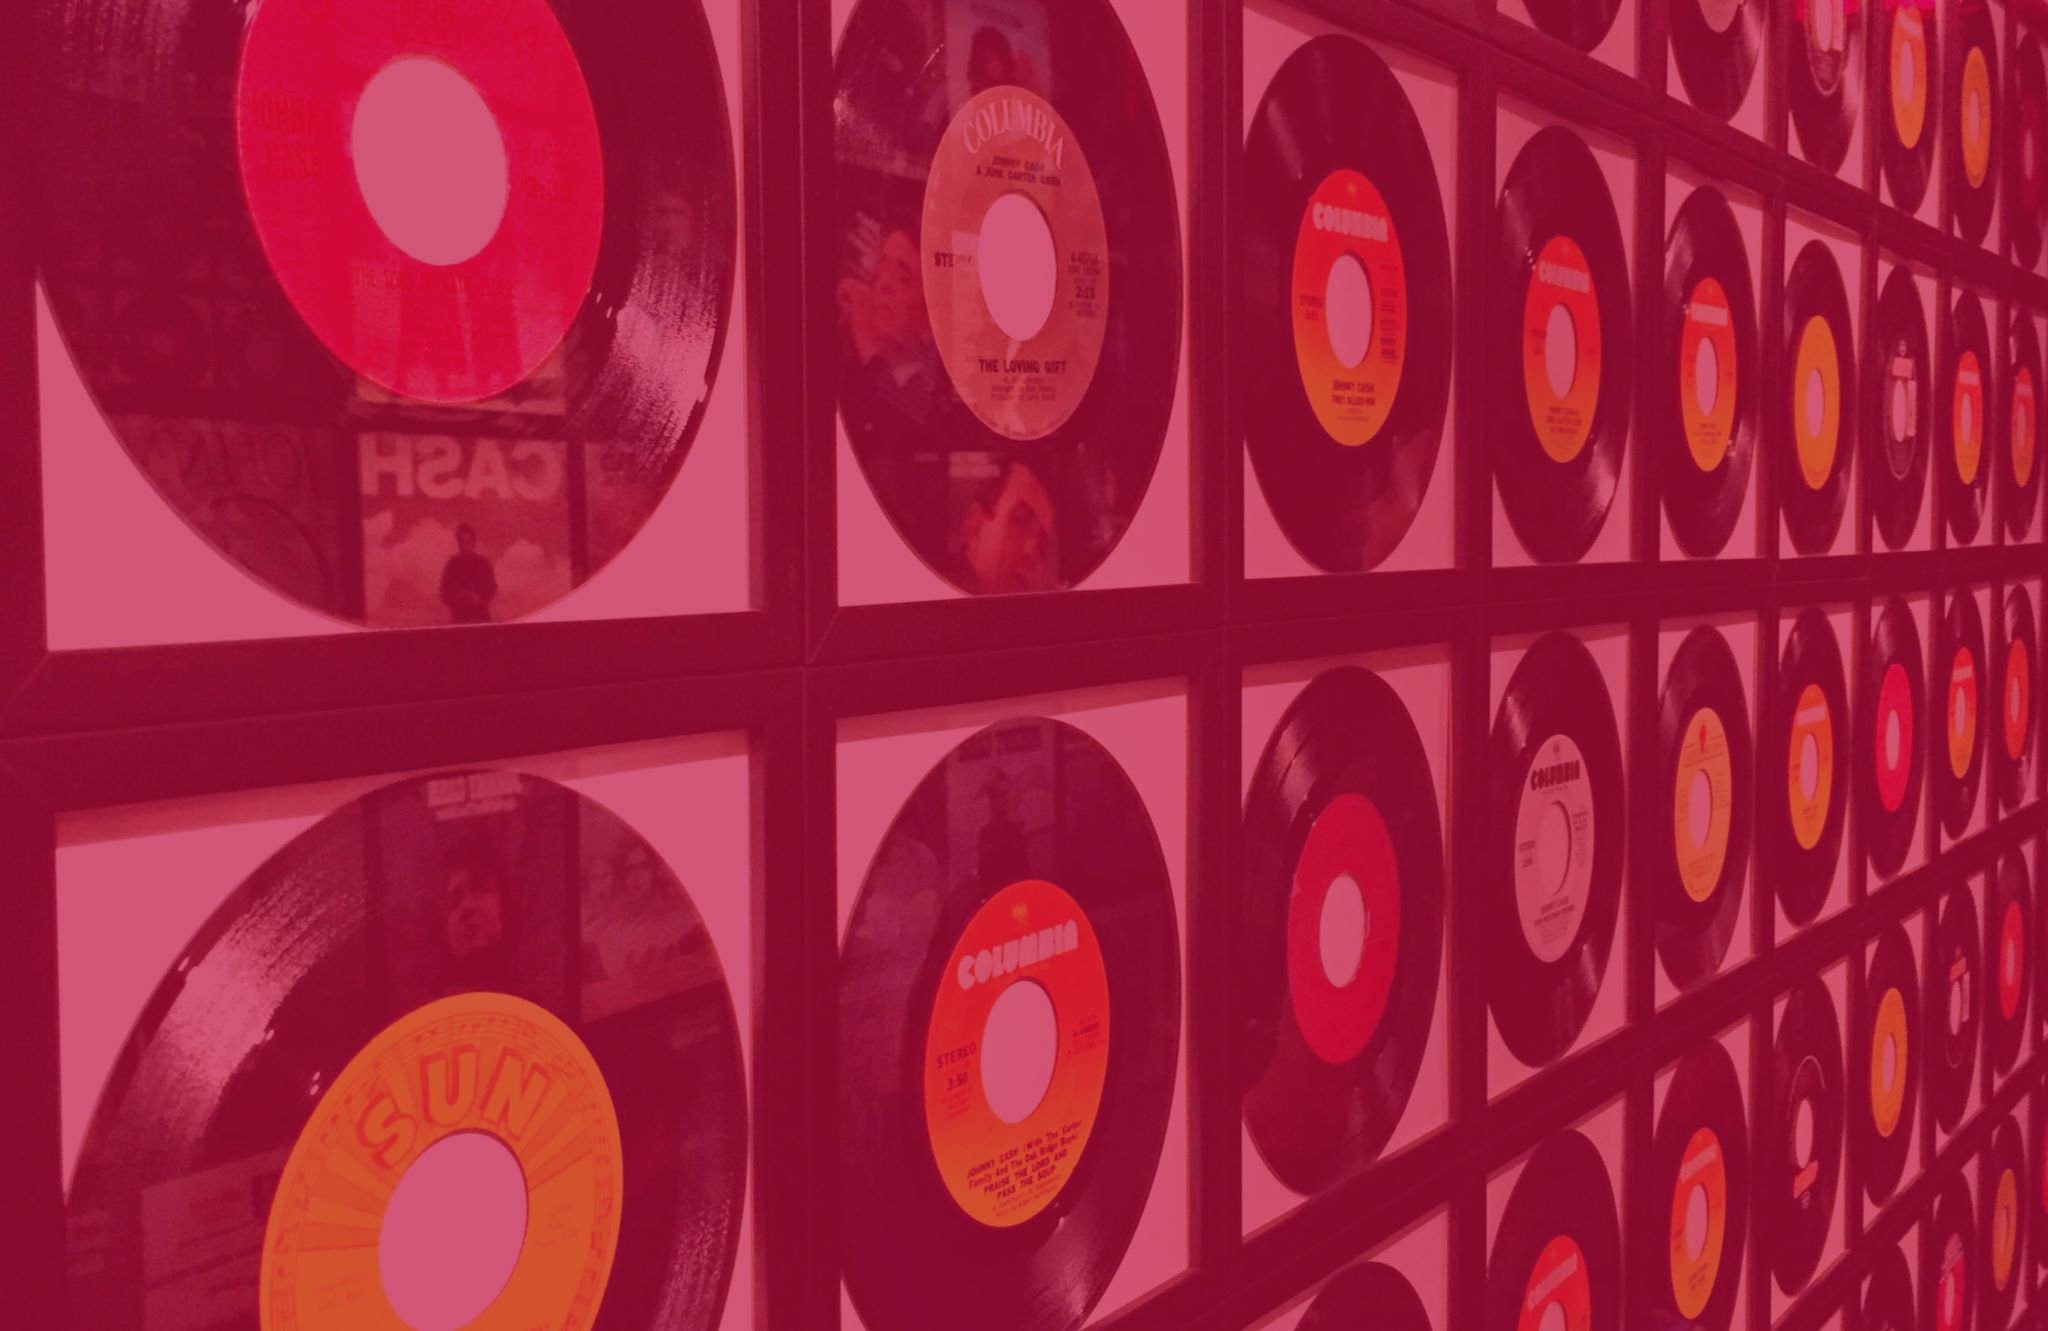 How To Manage Publishing As A Record Label